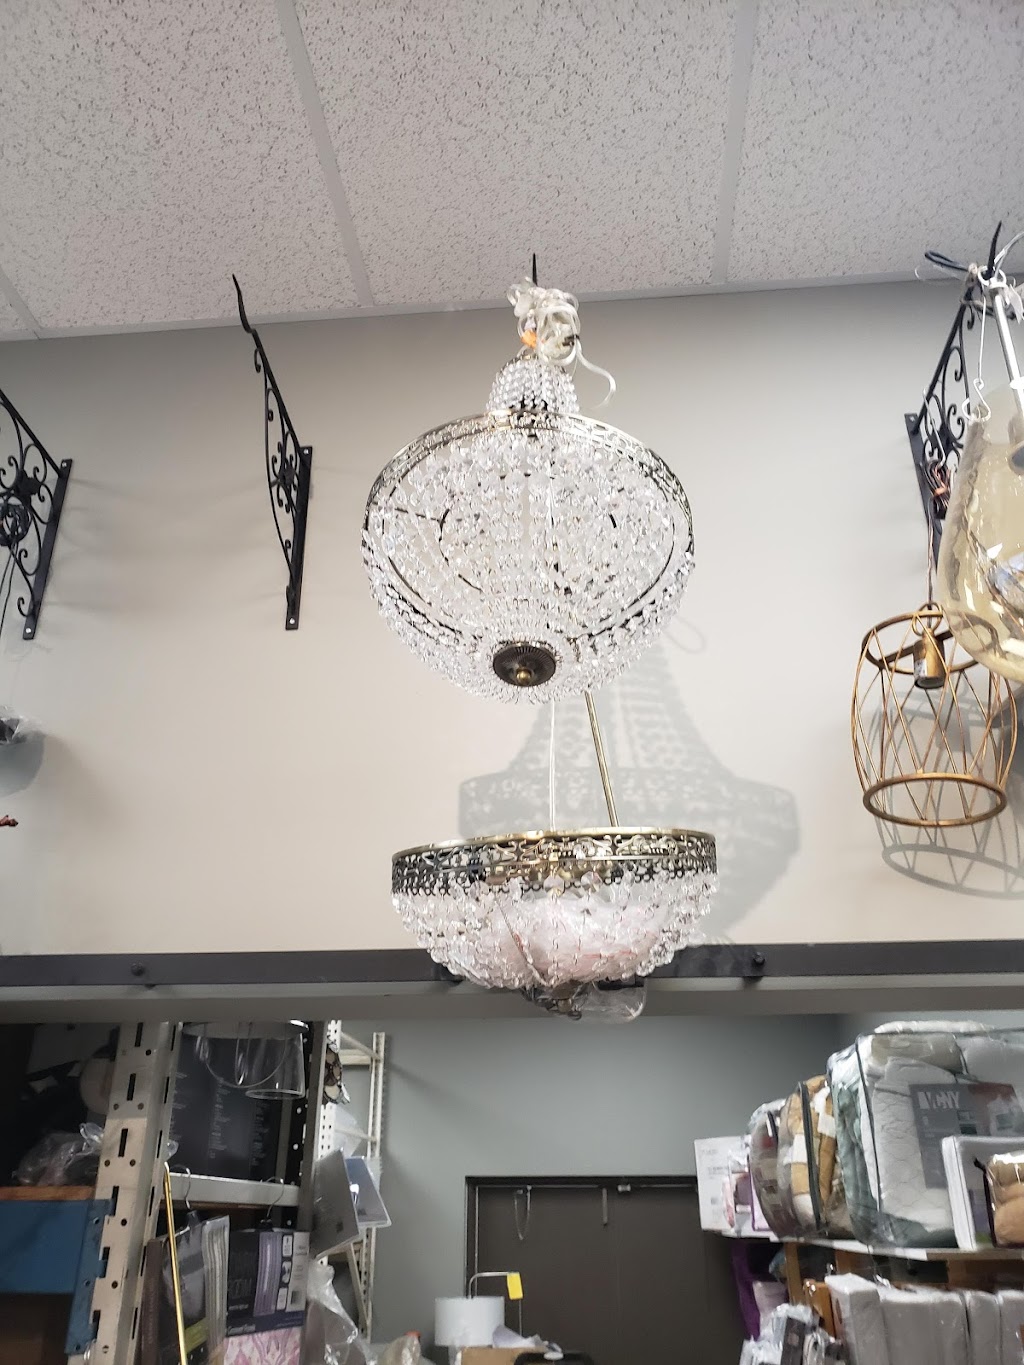 Home Decor and More by Rhonda Kirk | furniture store | 1000 10th St W, Owen Sound, Owen Sound, ON N4K 5S2, Canada | 5193757991 OR +1 519-375-7991